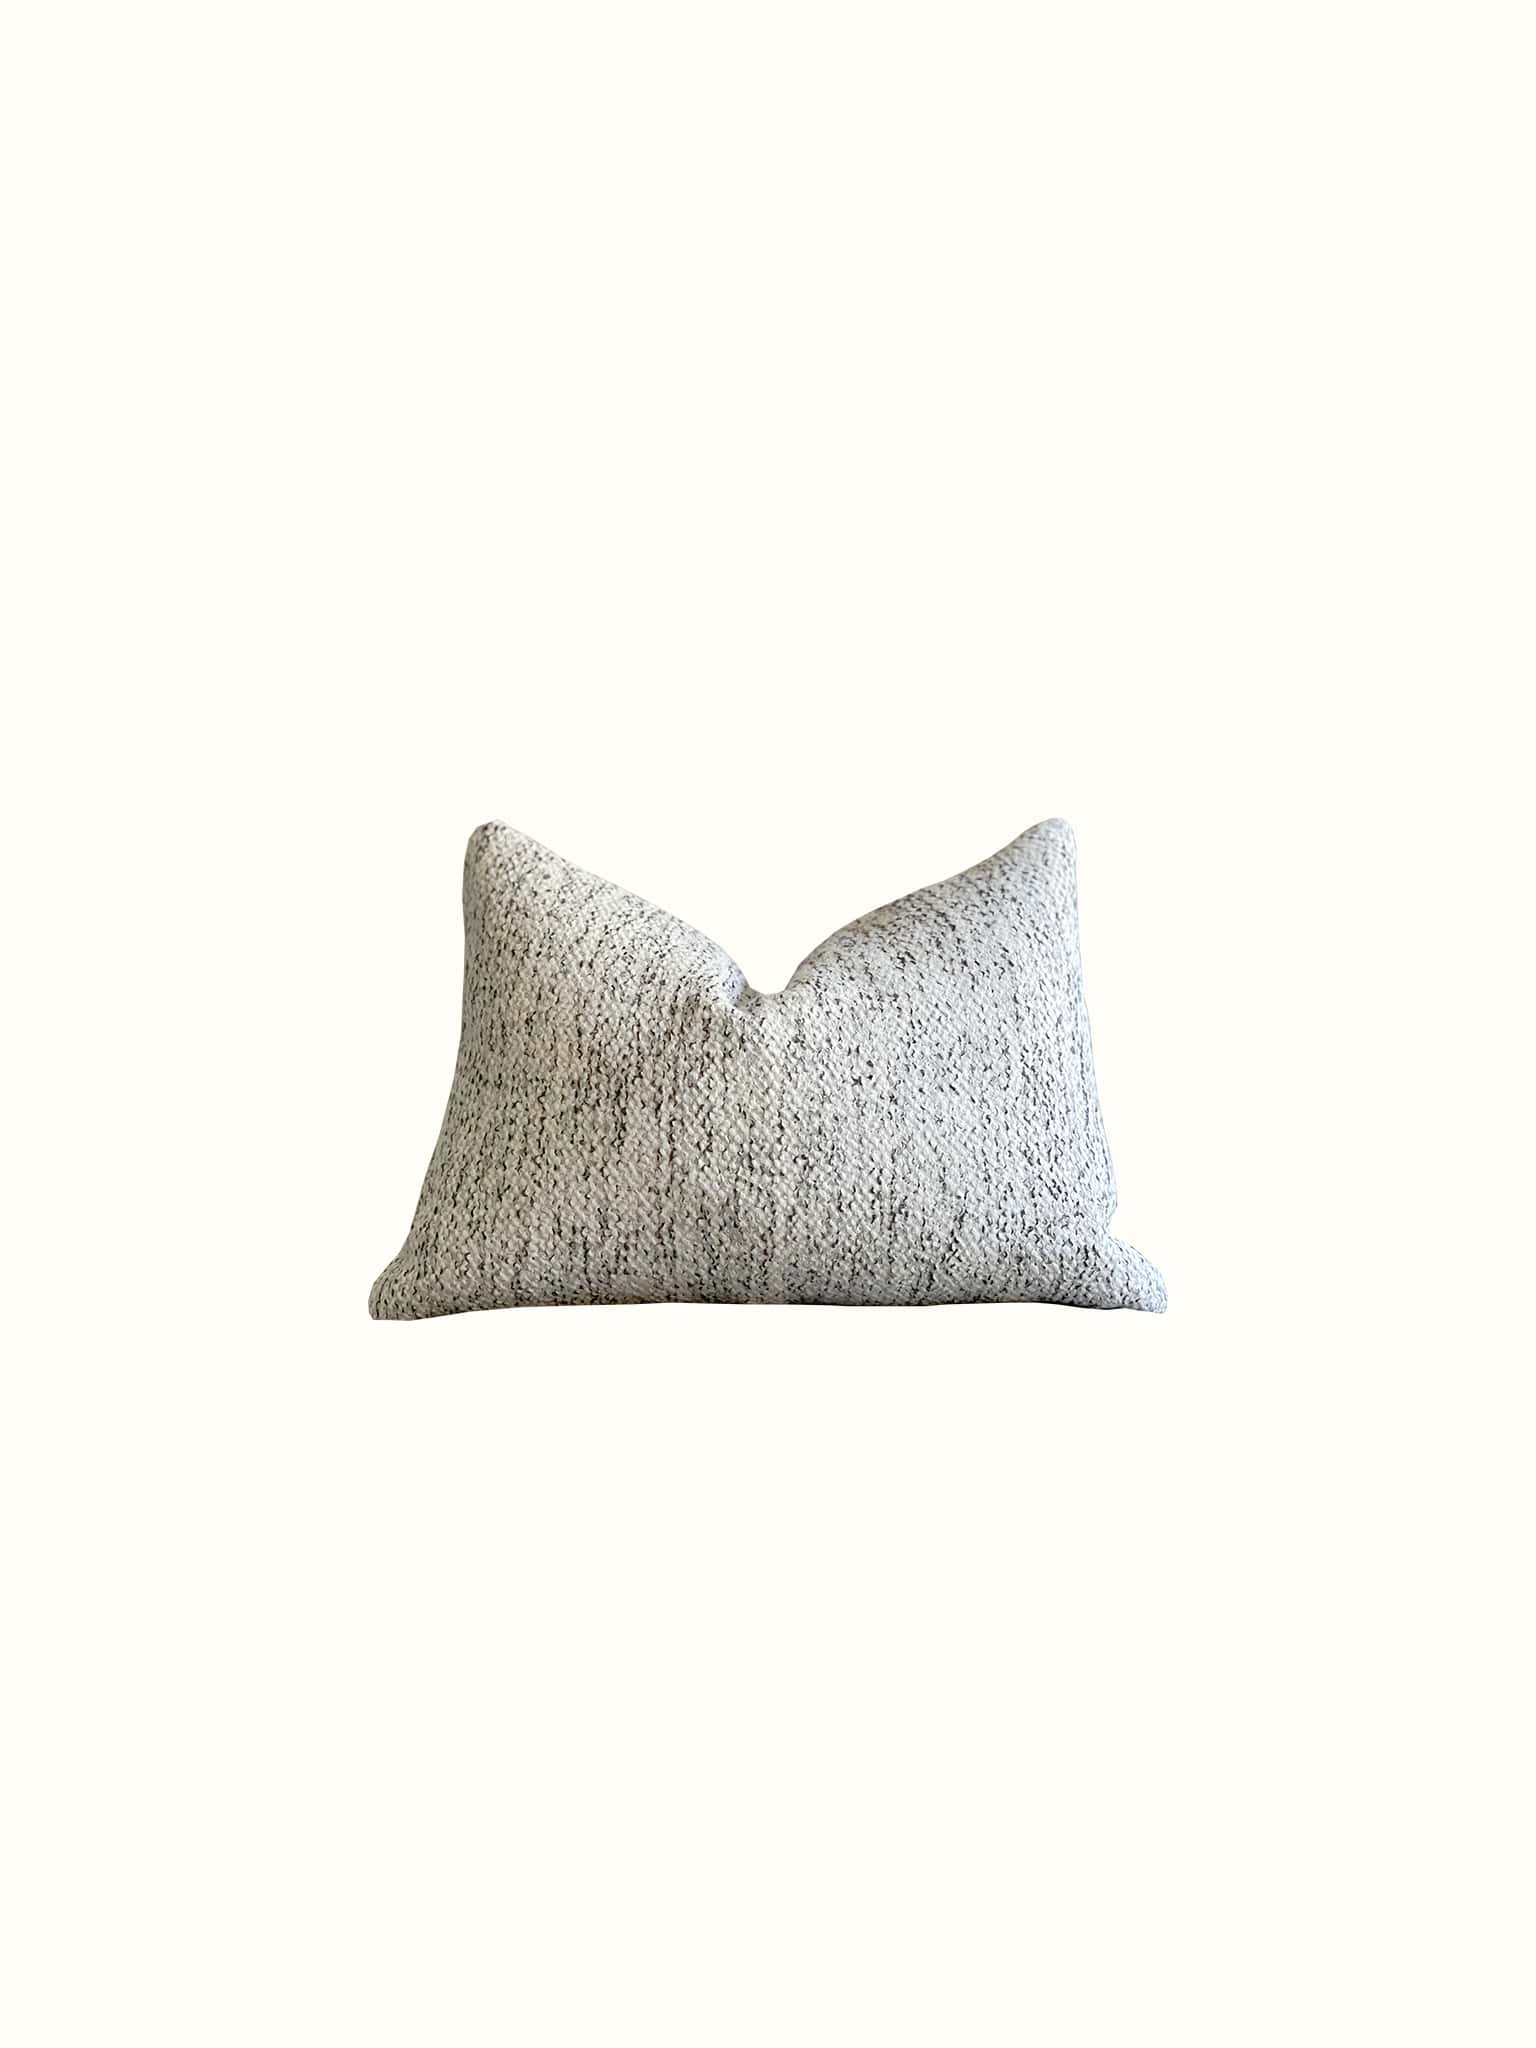 A neural boucle lumbar pillow in black and white interwoven achieving a marble fabric effect